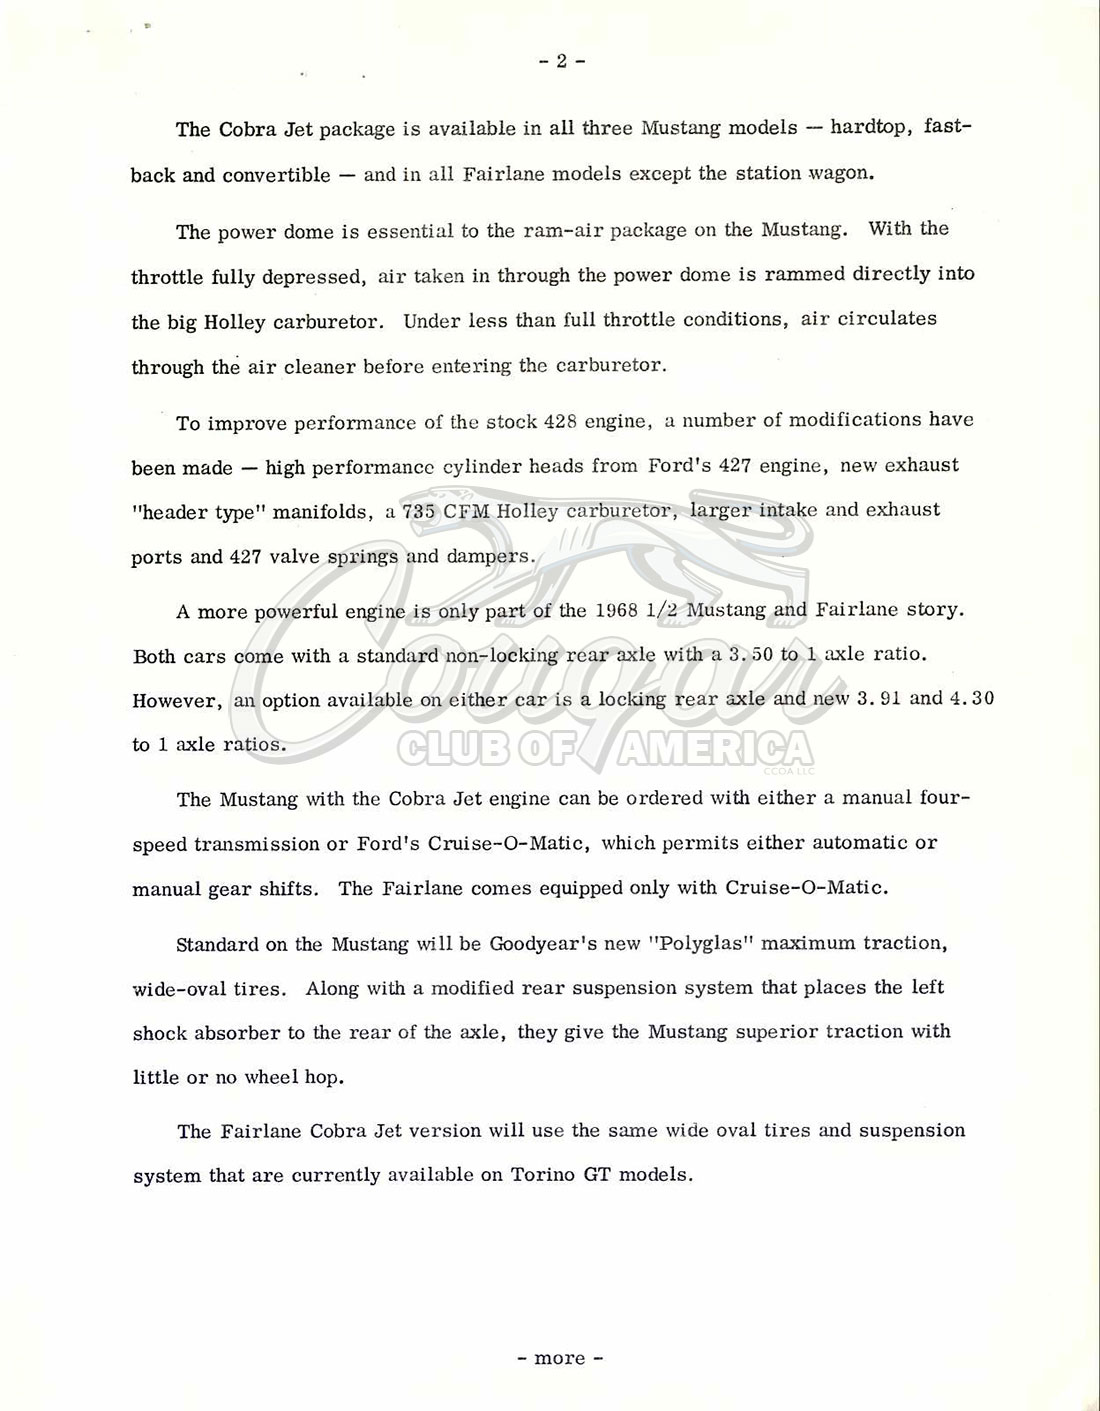 Ford Press Release for the 428 Cobra Jet Engine 04-15-1968